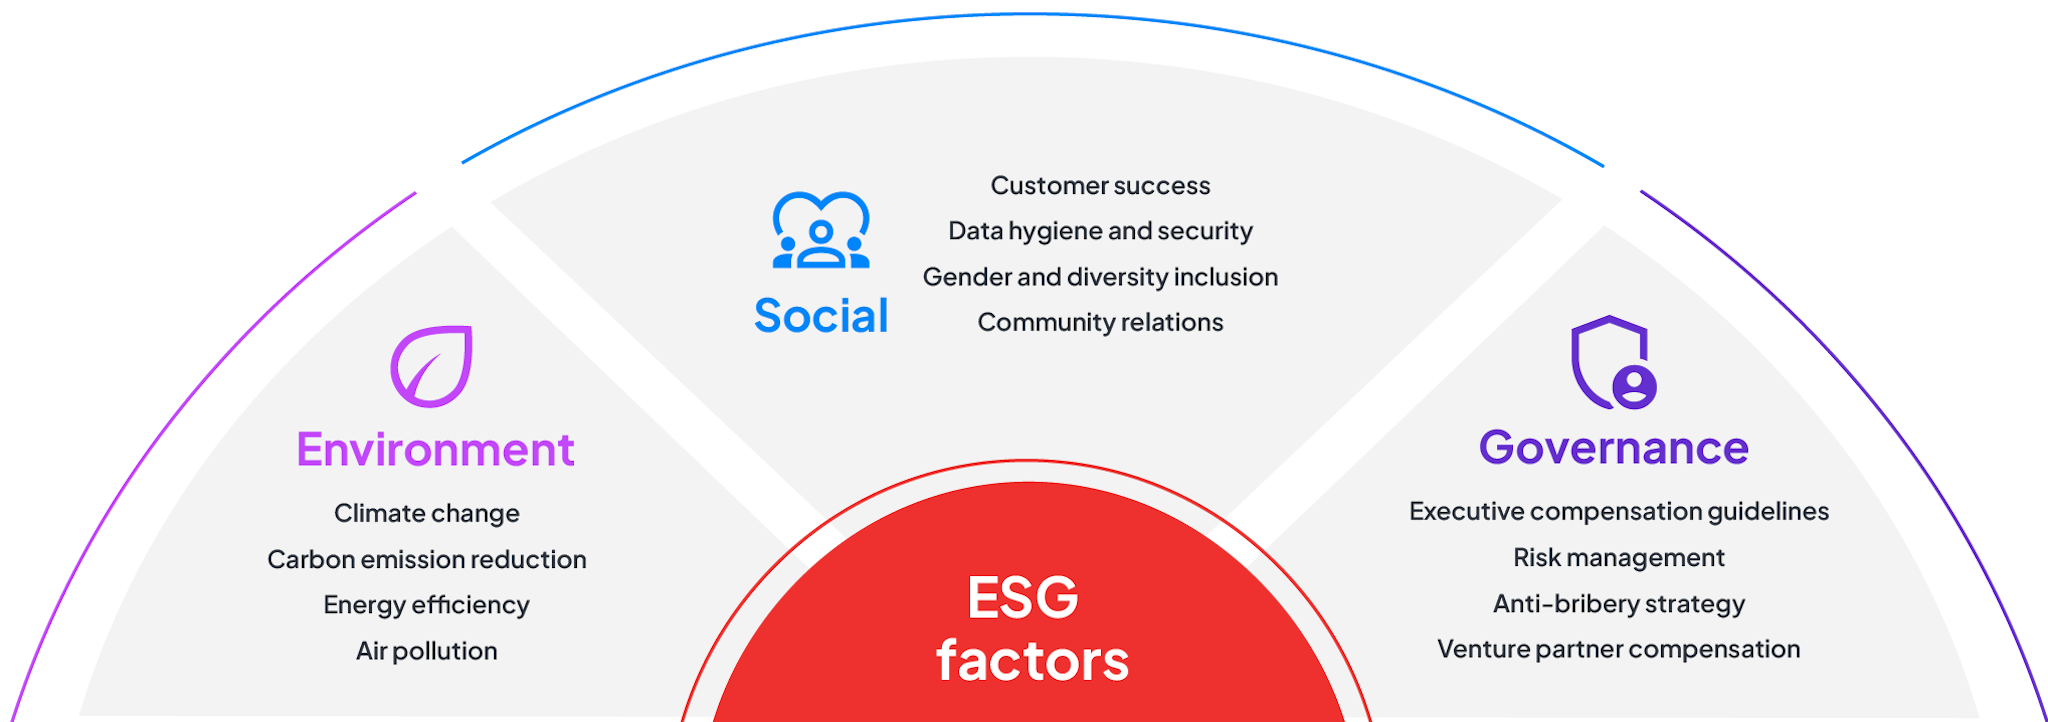 Overview of the ESG factors based on the three elements of ESG